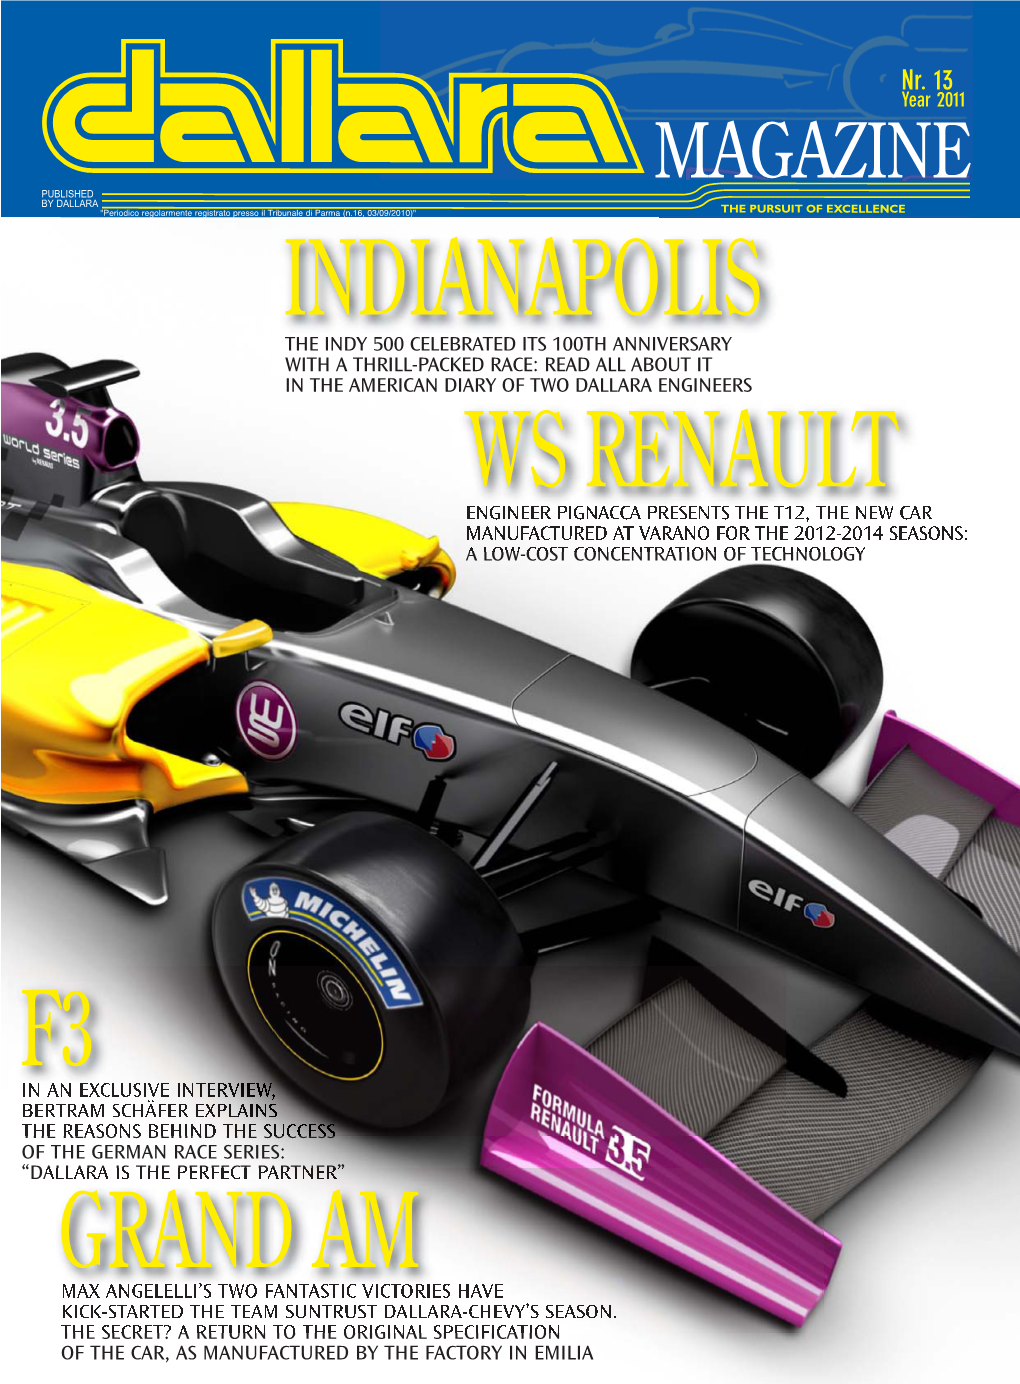 Grand Am F3 Ws Renault Indianapolis